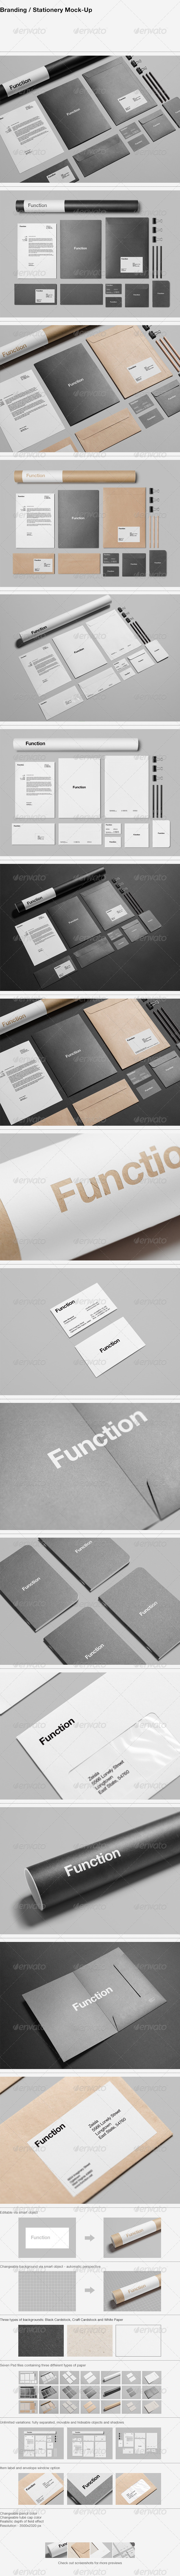 Graphics: Black Branding Business Card Cardboard Cardstock Cd Cover Cover Craft Eco Envelope Folder Identity Memo Memo Book Mock Up Mockup Paperboard Realistic Recycled Render Stationery Visual Visual Identity White